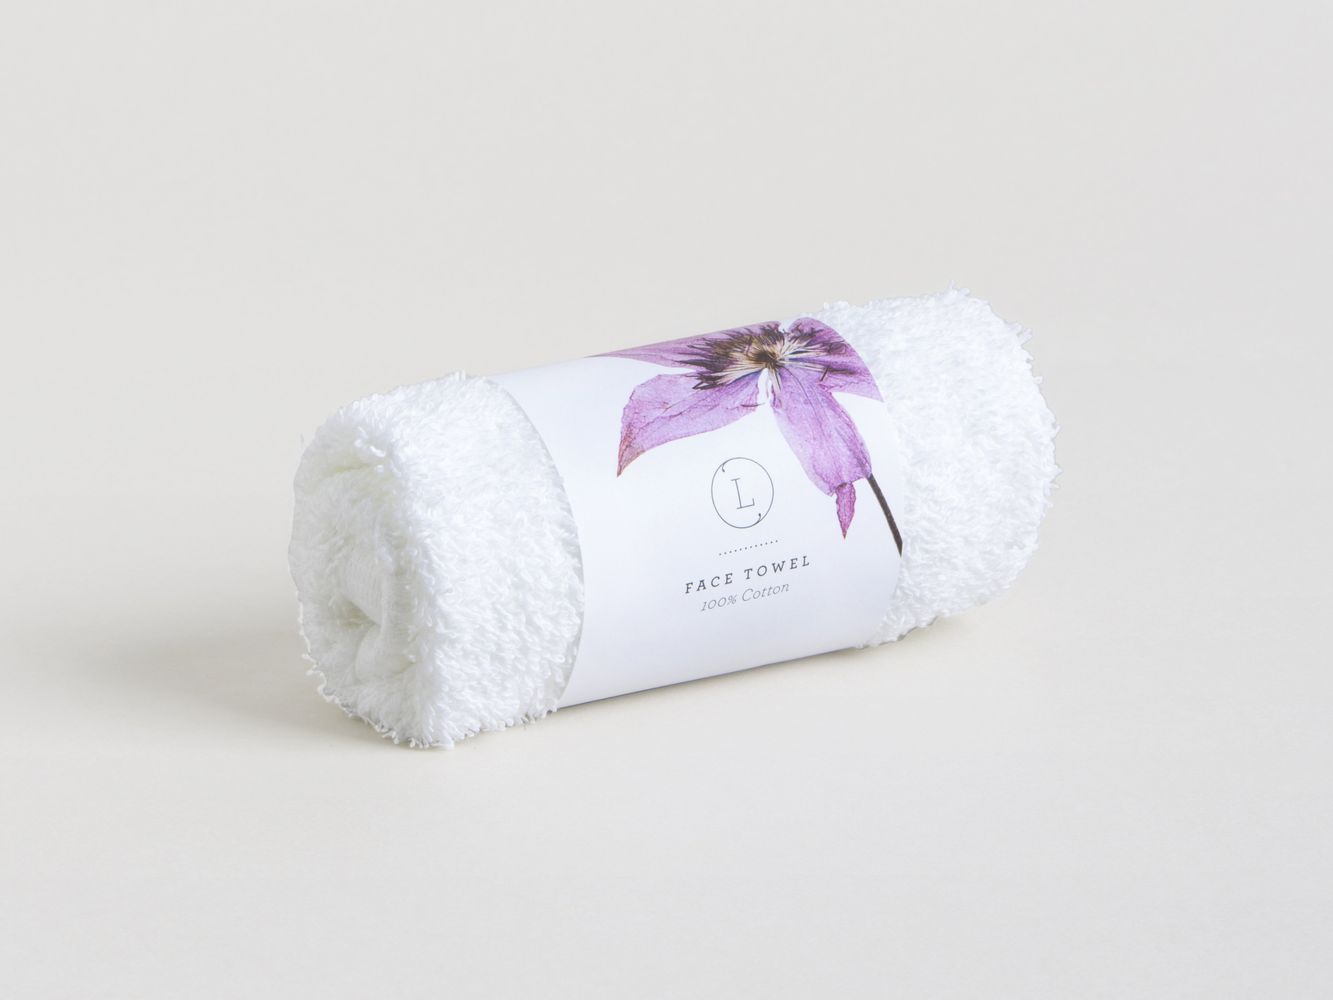 A Spa Gift Box, Natural Lavender Bath & Body Relaxing Package for Friend - .